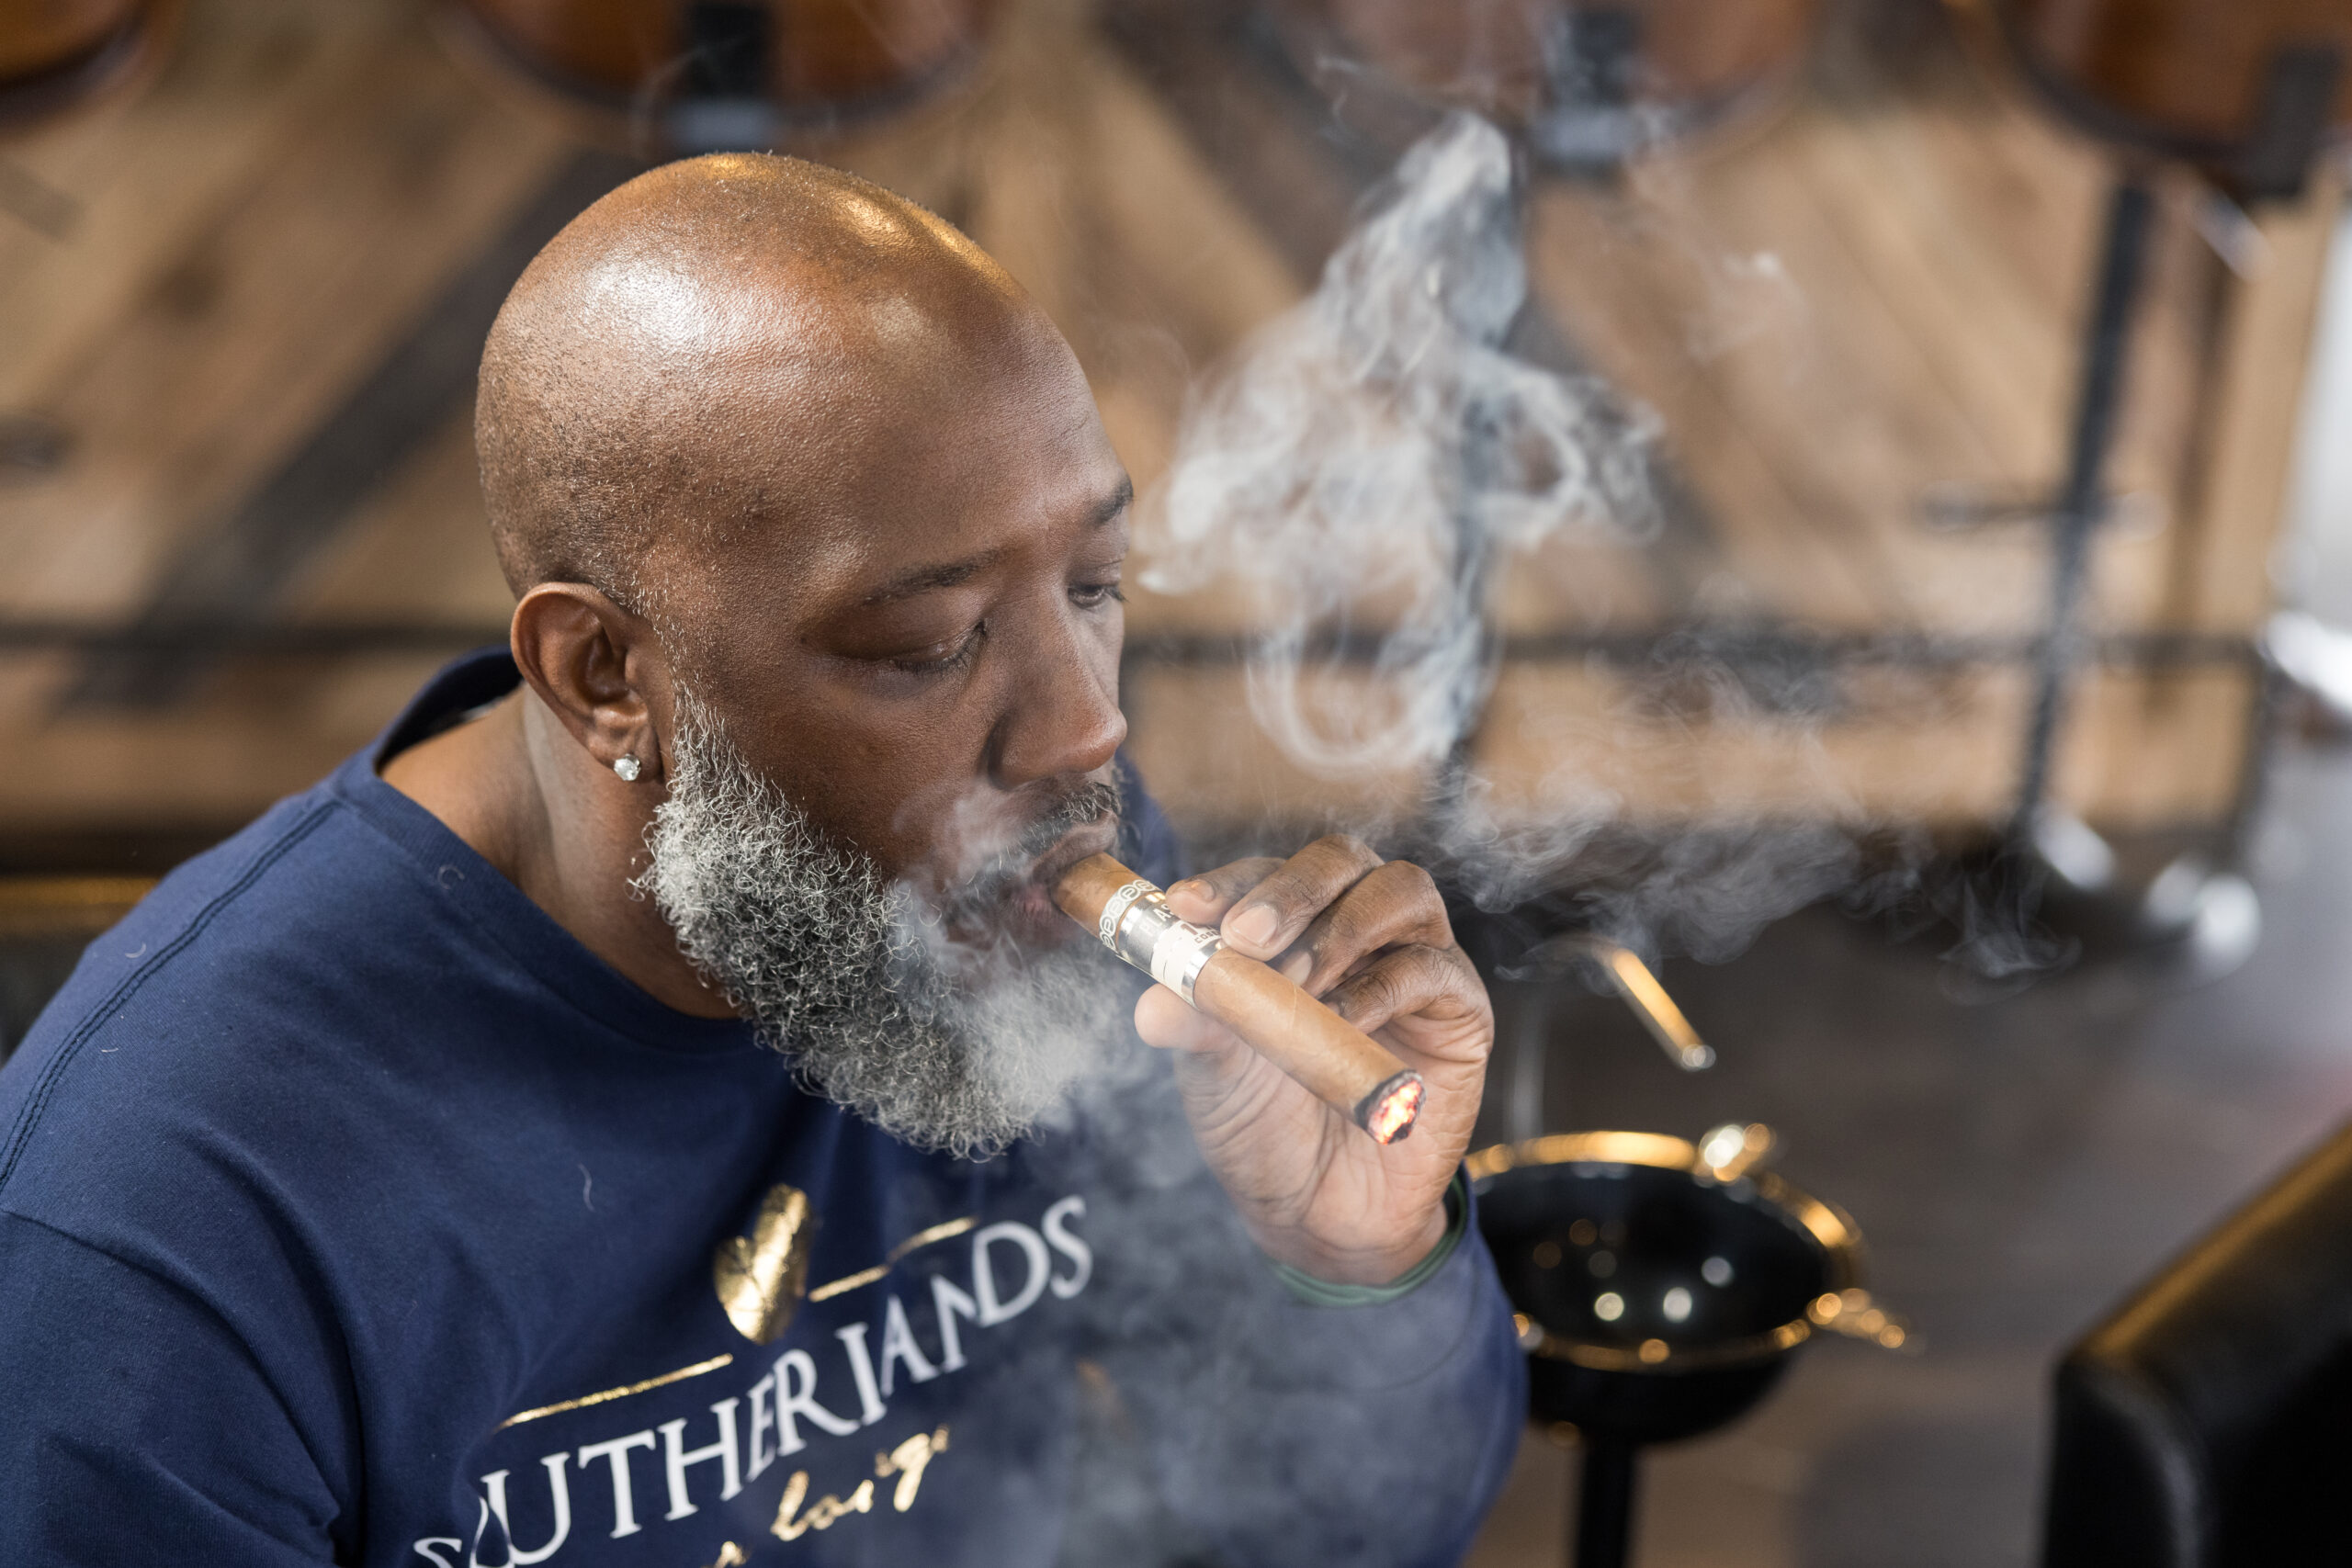 Wayne Southerland, owner of Southerlands Cigar Lounge in High Point, NC smokes a cigar.